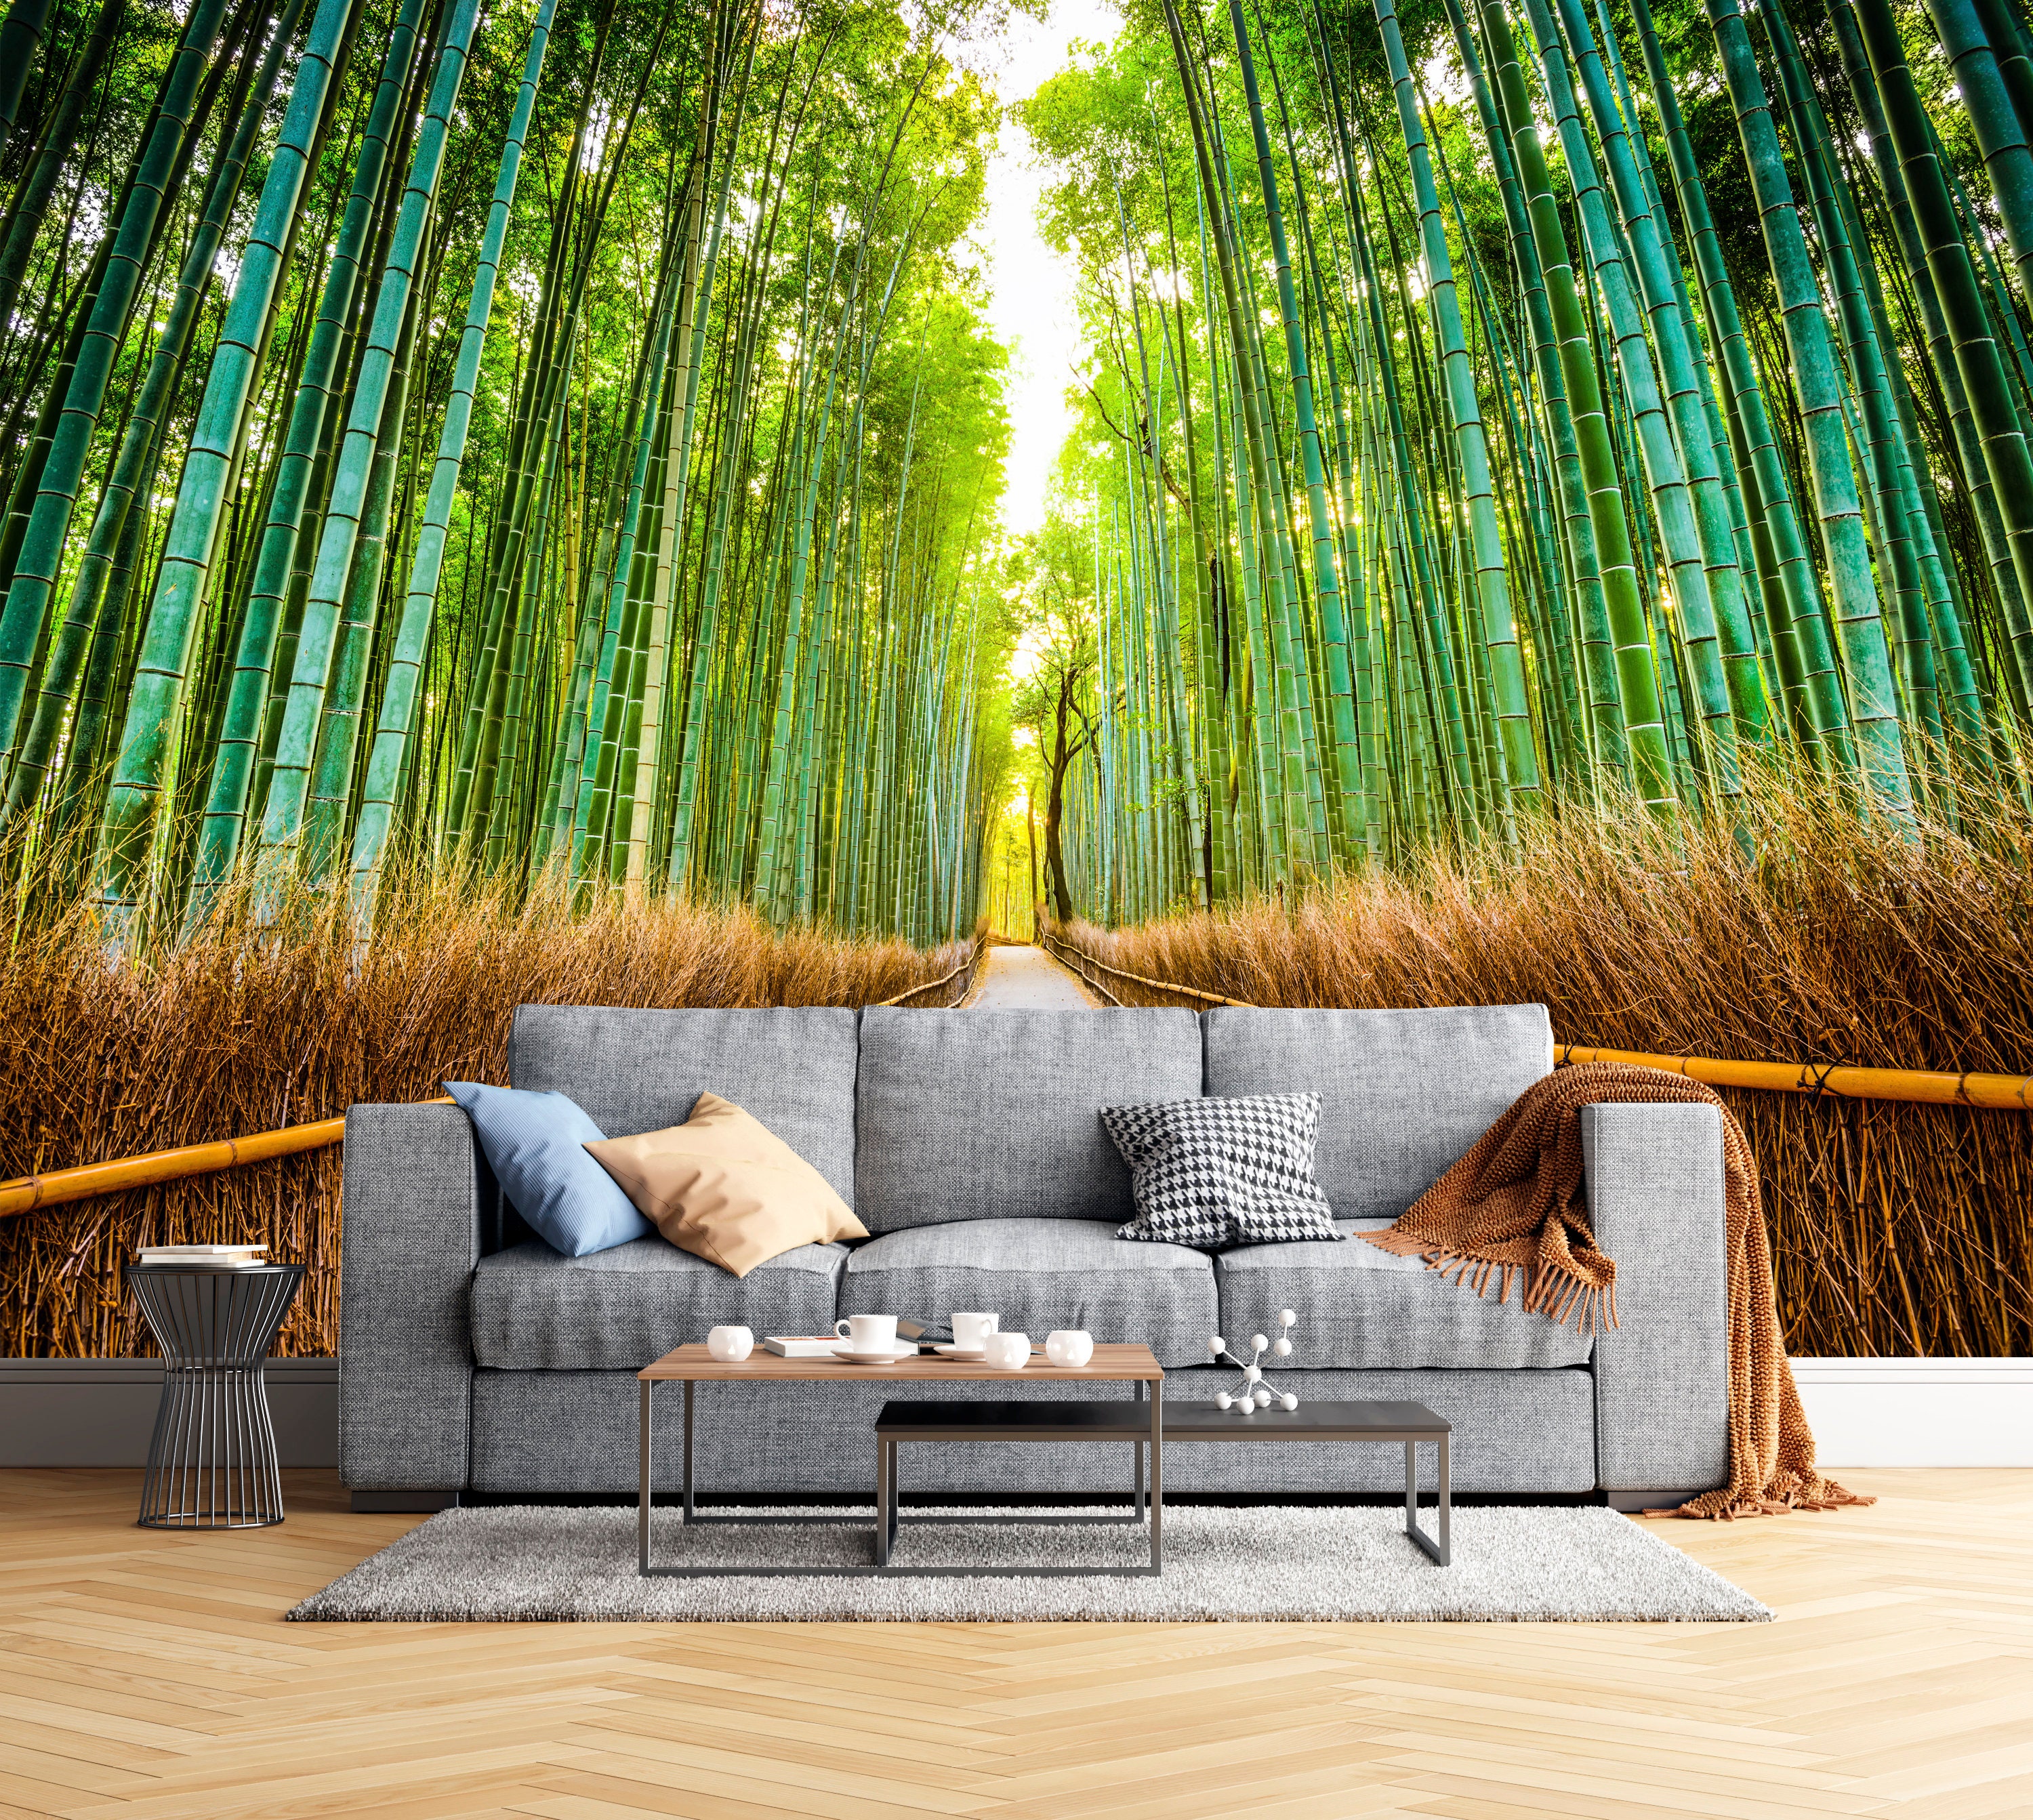 Wall Mural Bamboo Forest Photo Wallpaper Natural Landscape Waterproof  Removable Pictures for Livingroom Bedroom Wall Home Decor 325x232 Inch